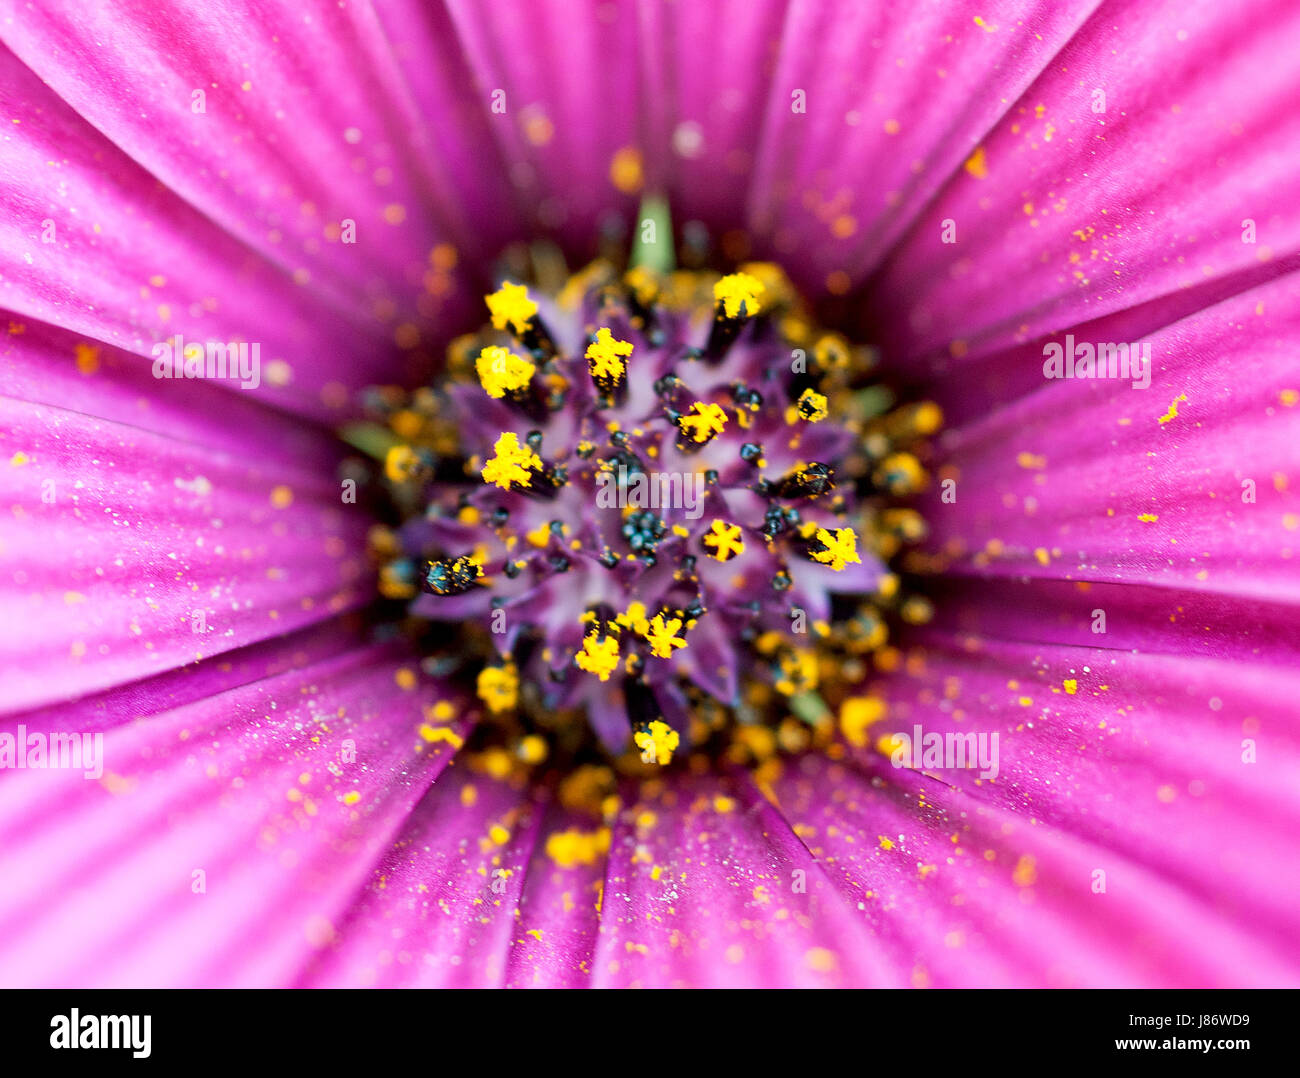 The pink striped petals and yellow pollen of an osteospermum flower from the daisy family photographed close up on the Greek island of Kefalonia. Stock Photo